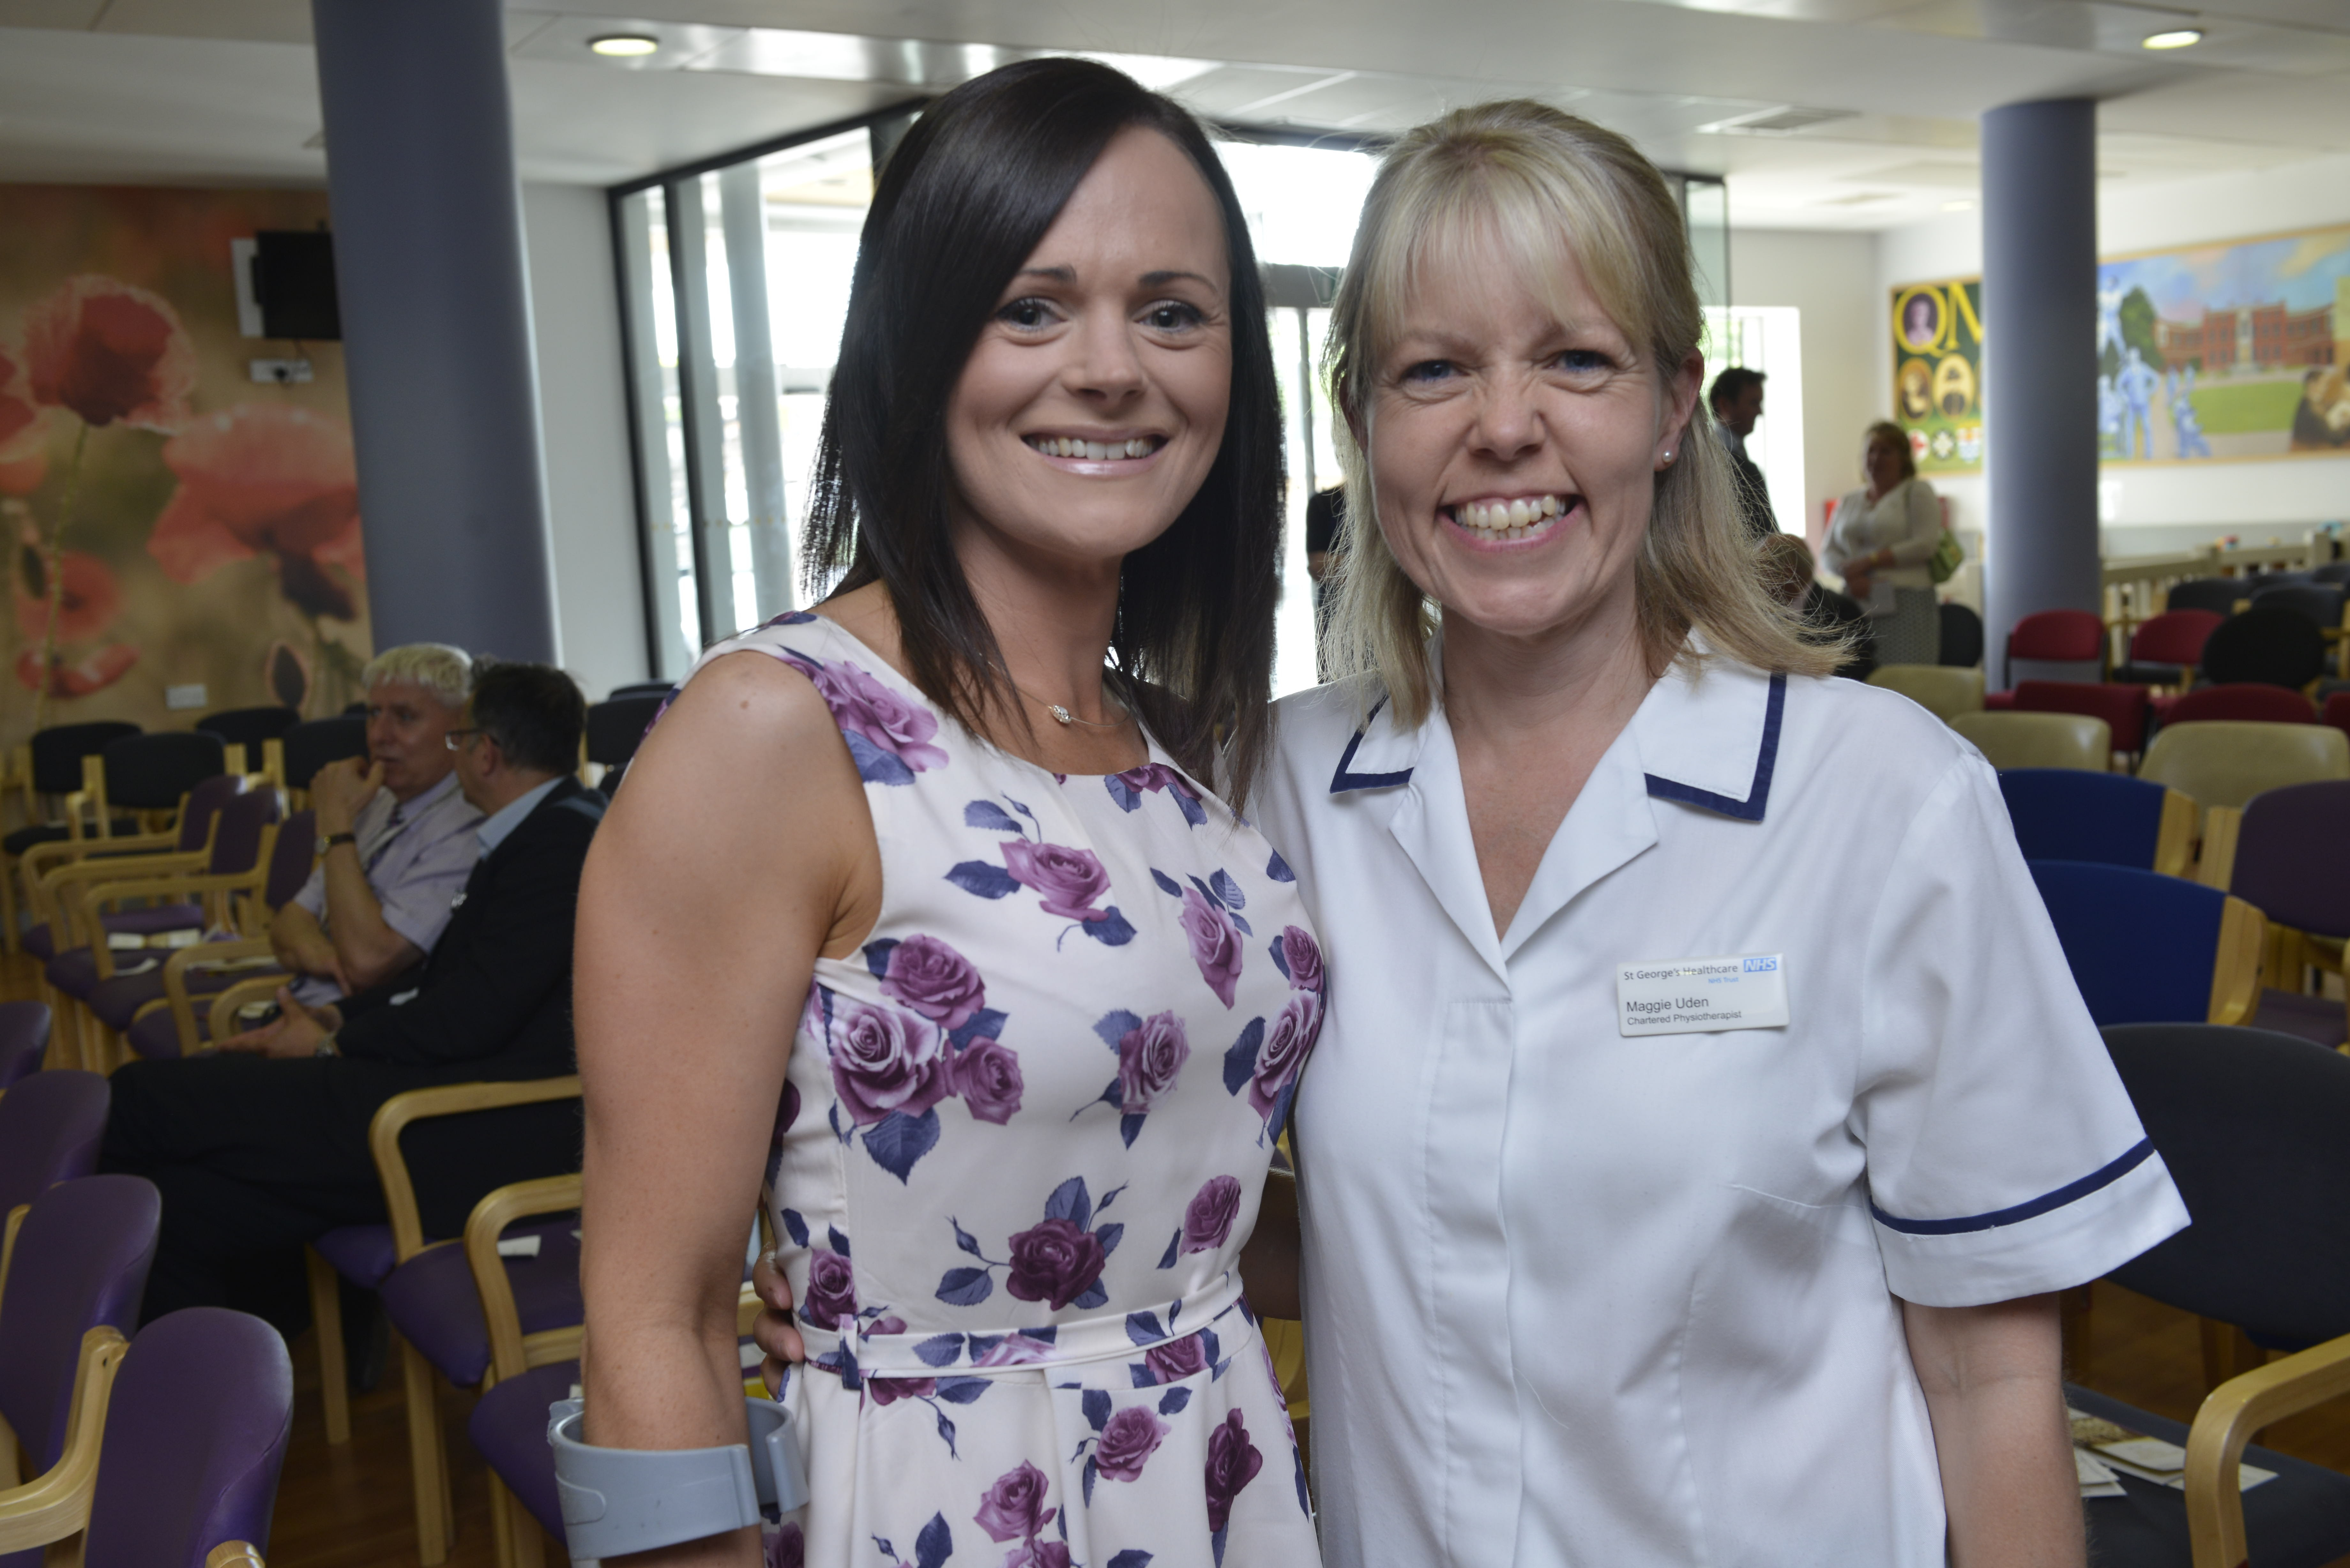 Gemma with Maggie Uden, a chartered physiotherapist at Queen Mary's